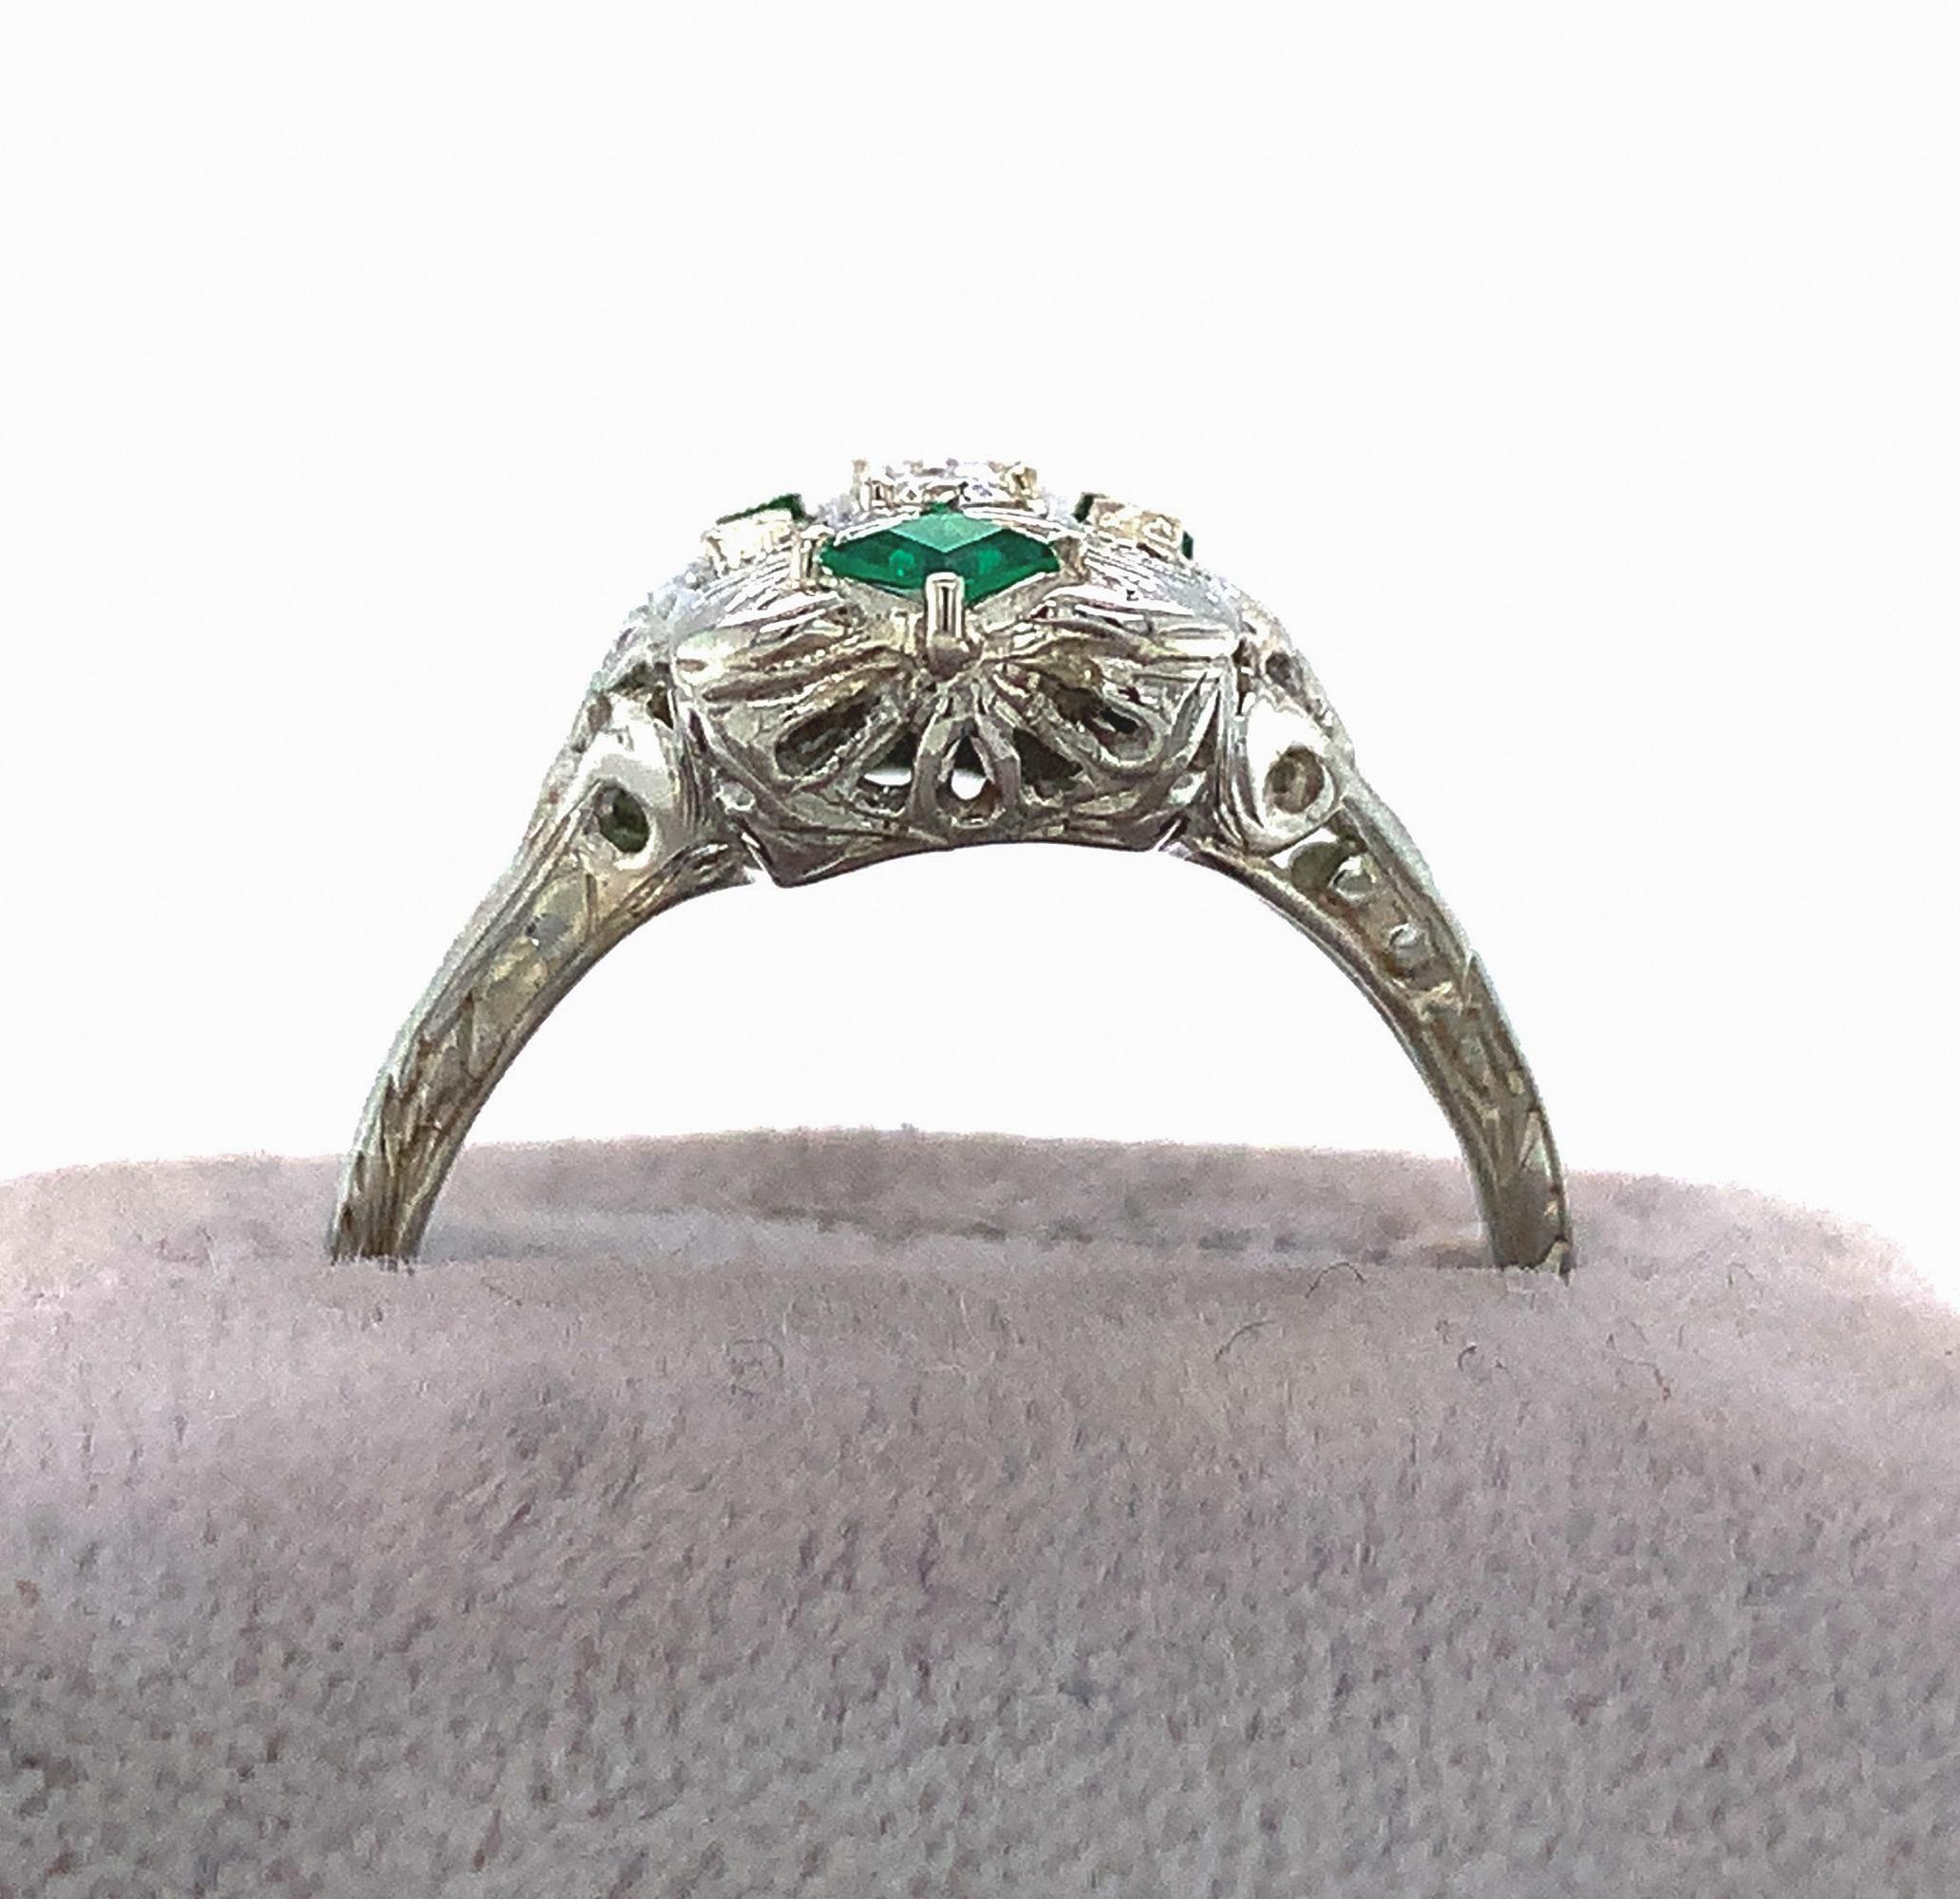  18K white gold filigree diamond ring with synthetic emerald accents. There are 3 round diamonds and 4 specialty cut synthetic emeralds. There are 3 round brilliant cut diamonds measuring about 1.8mm each for a total weigh of about .08cts. The